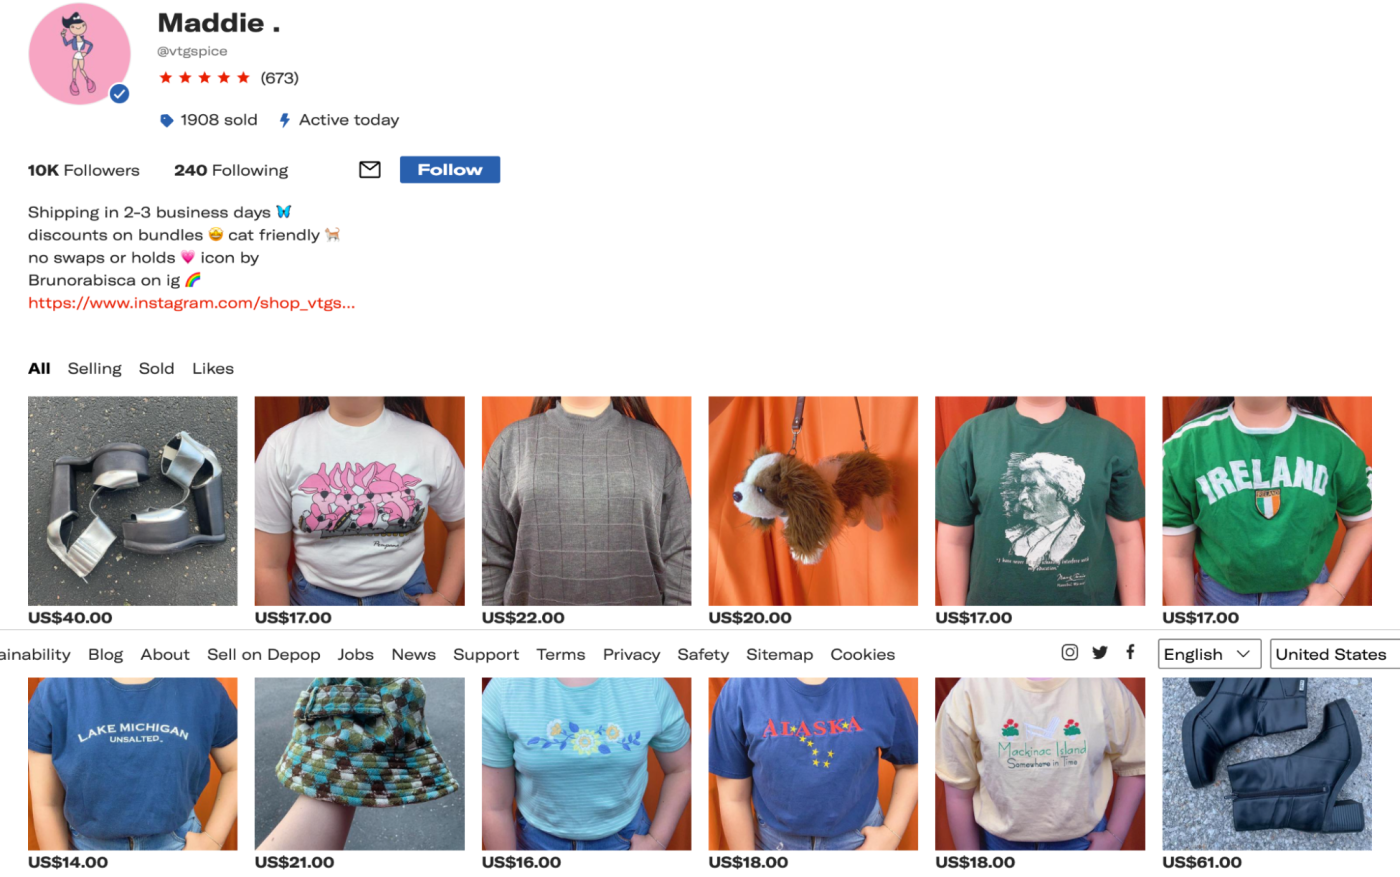 A VTGSpice storefront selling '90s-era shirts